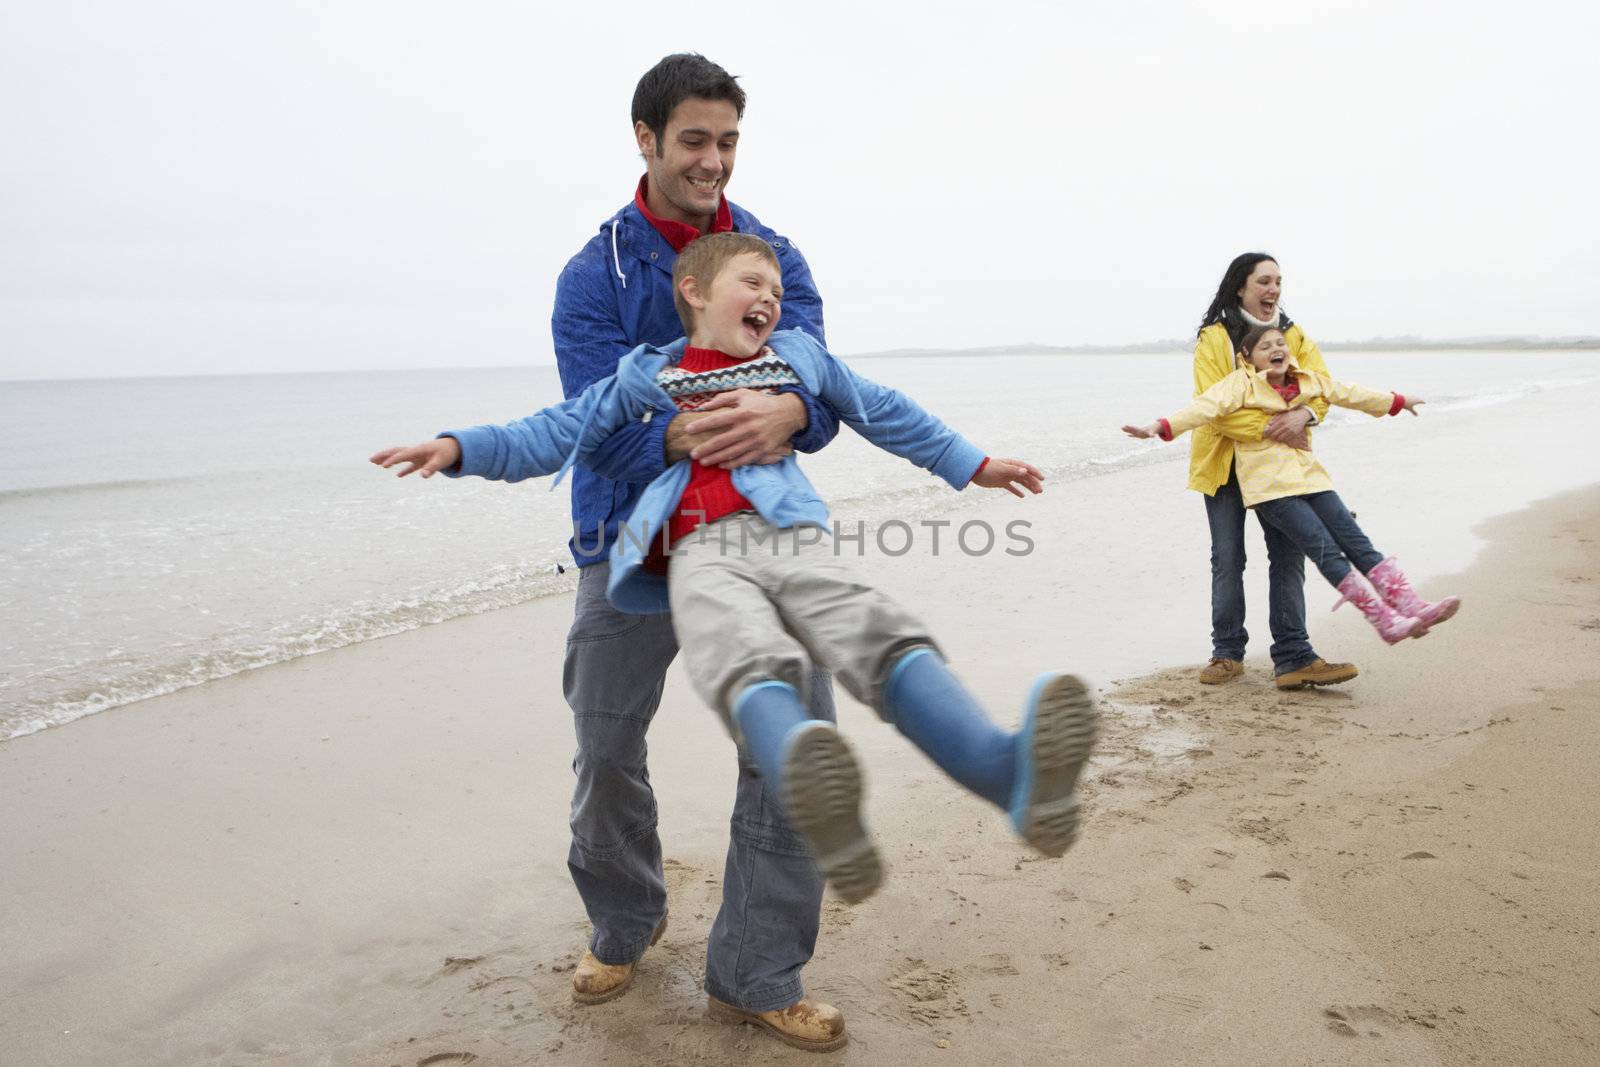 Family playing on beach by omg_images